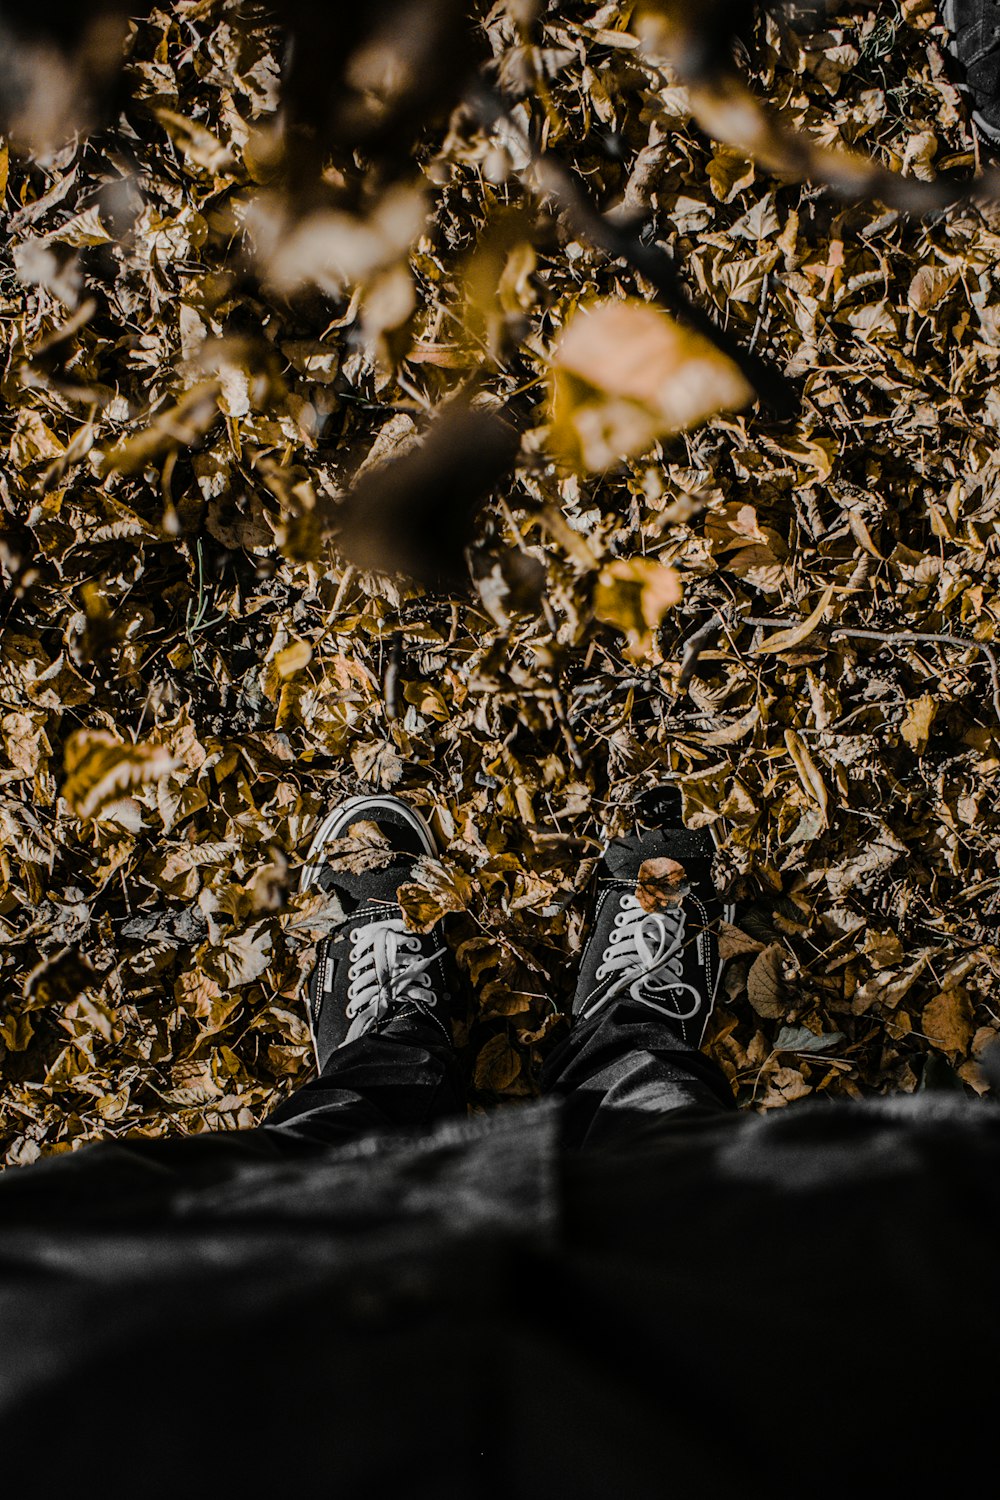 person in black pants and black and white sneakers standing on brown dried leaves during daytime